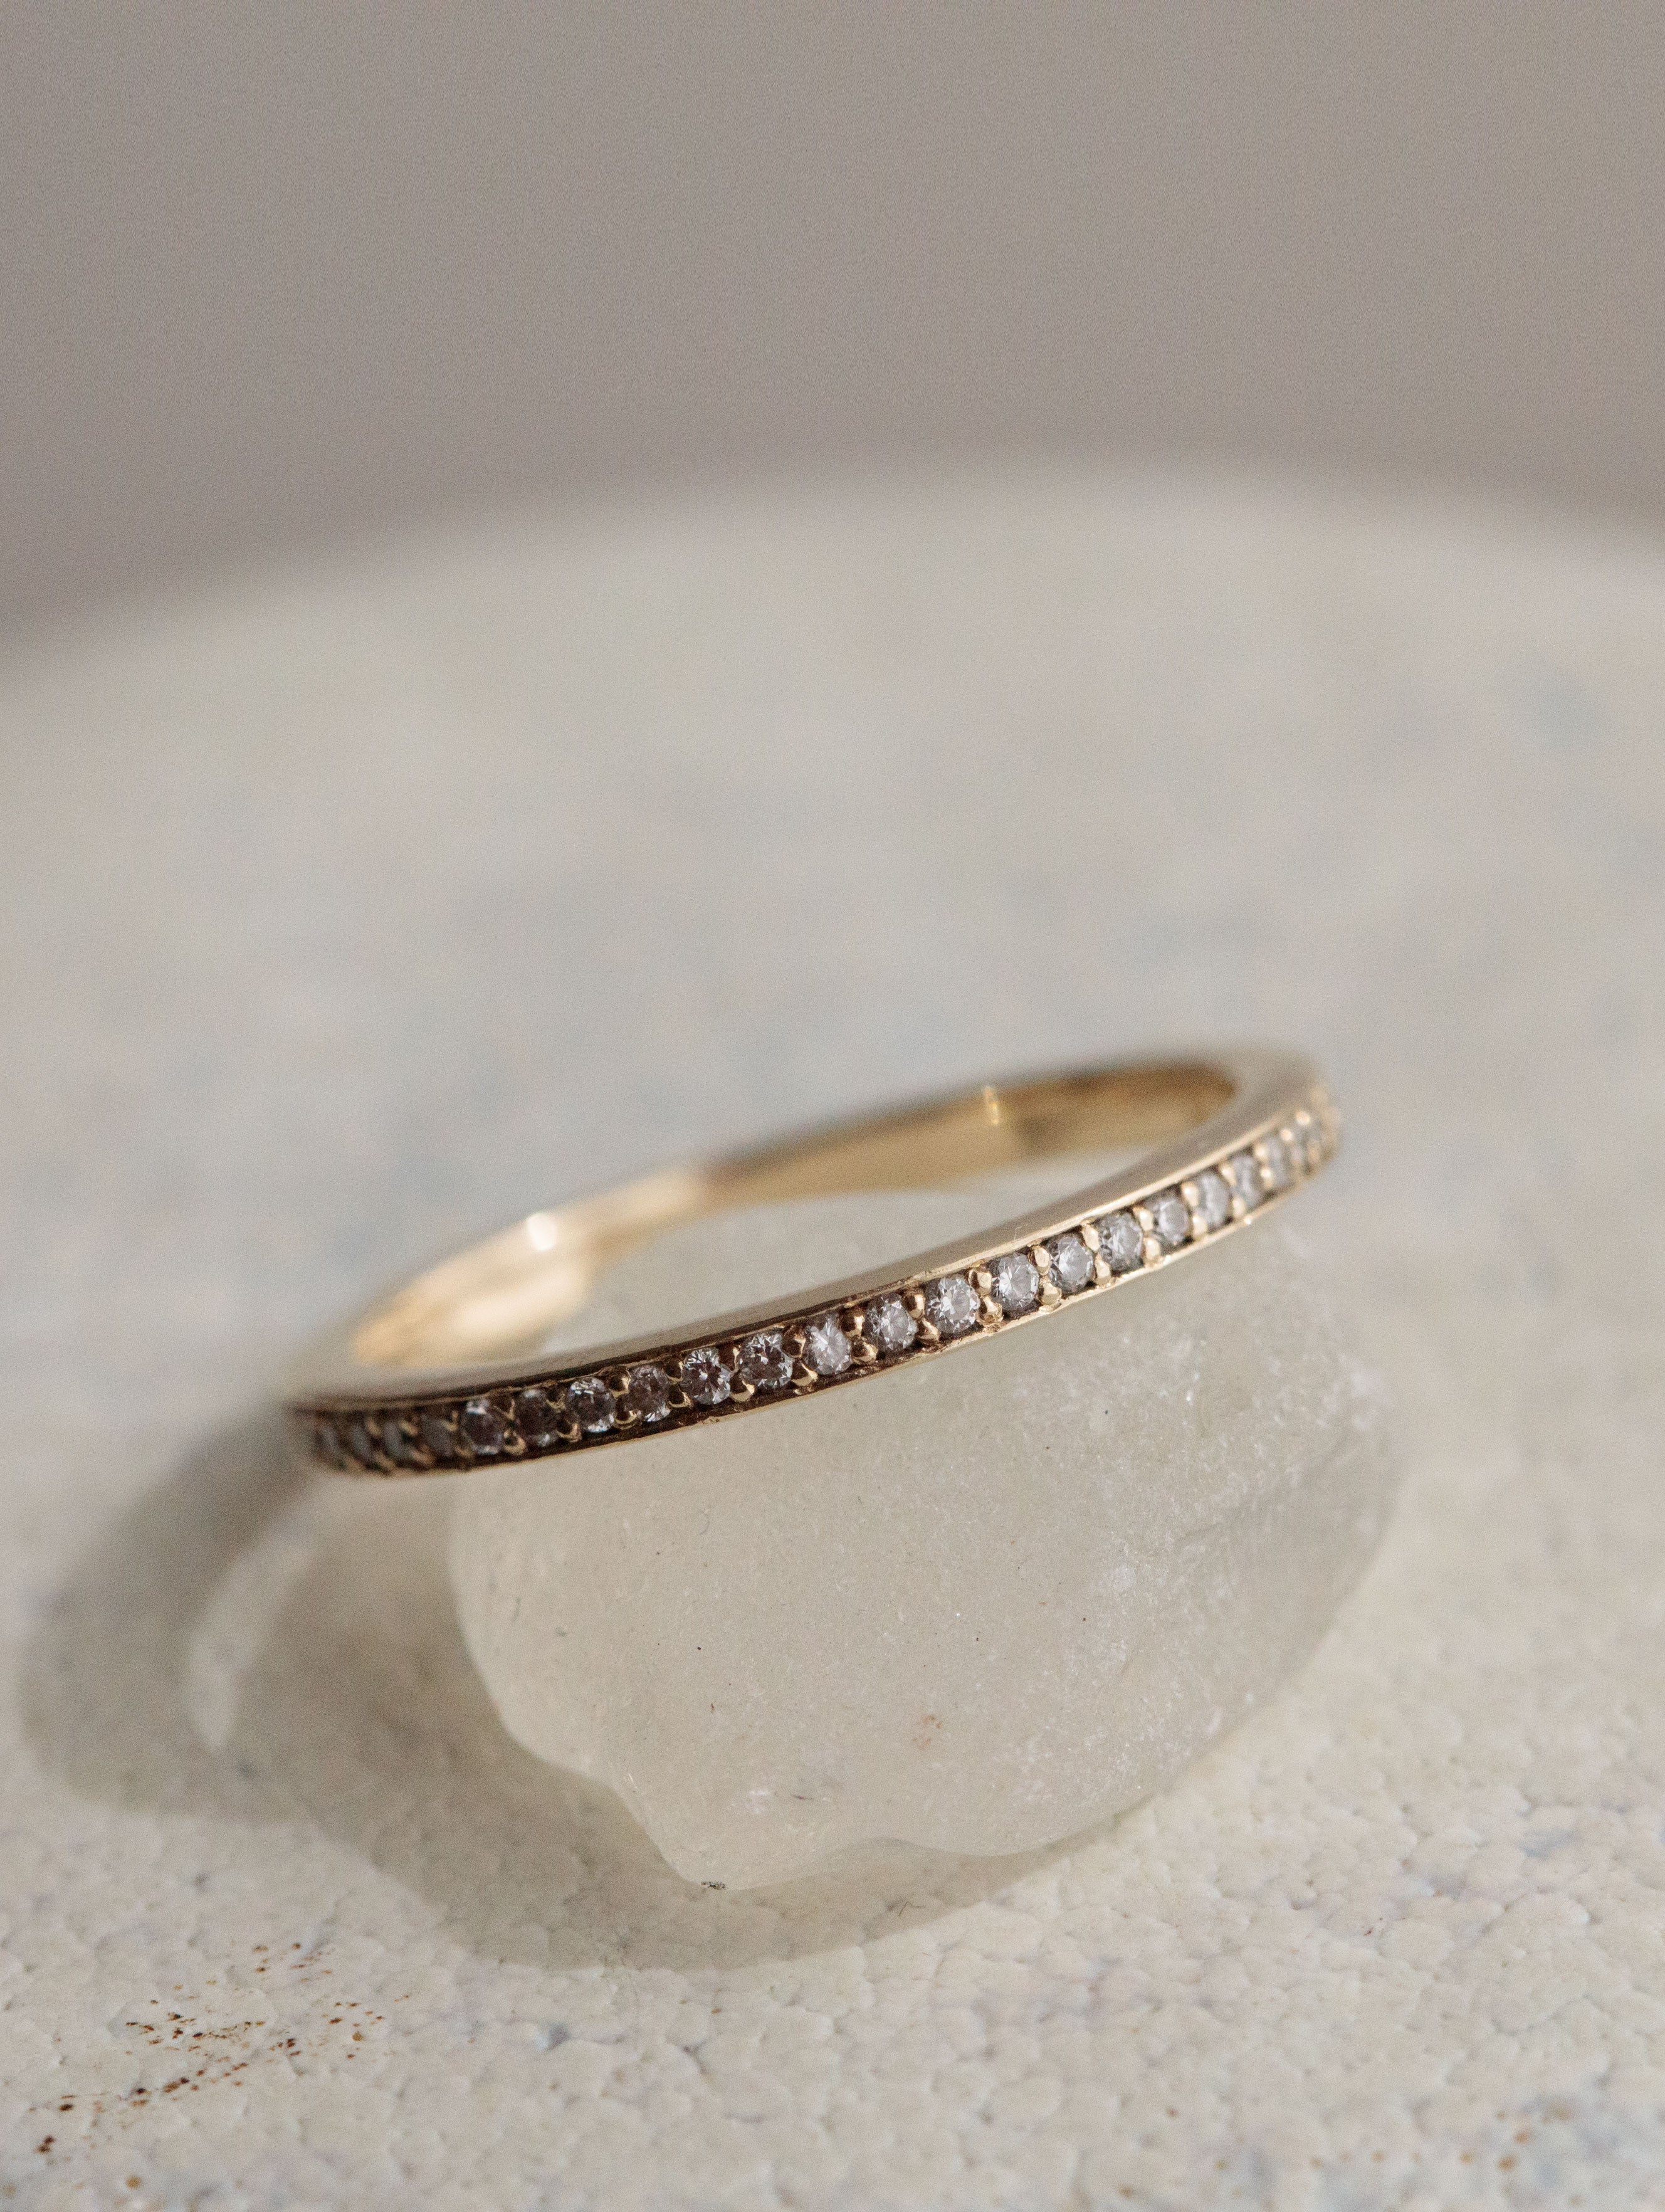 Eternity ring - Price on request